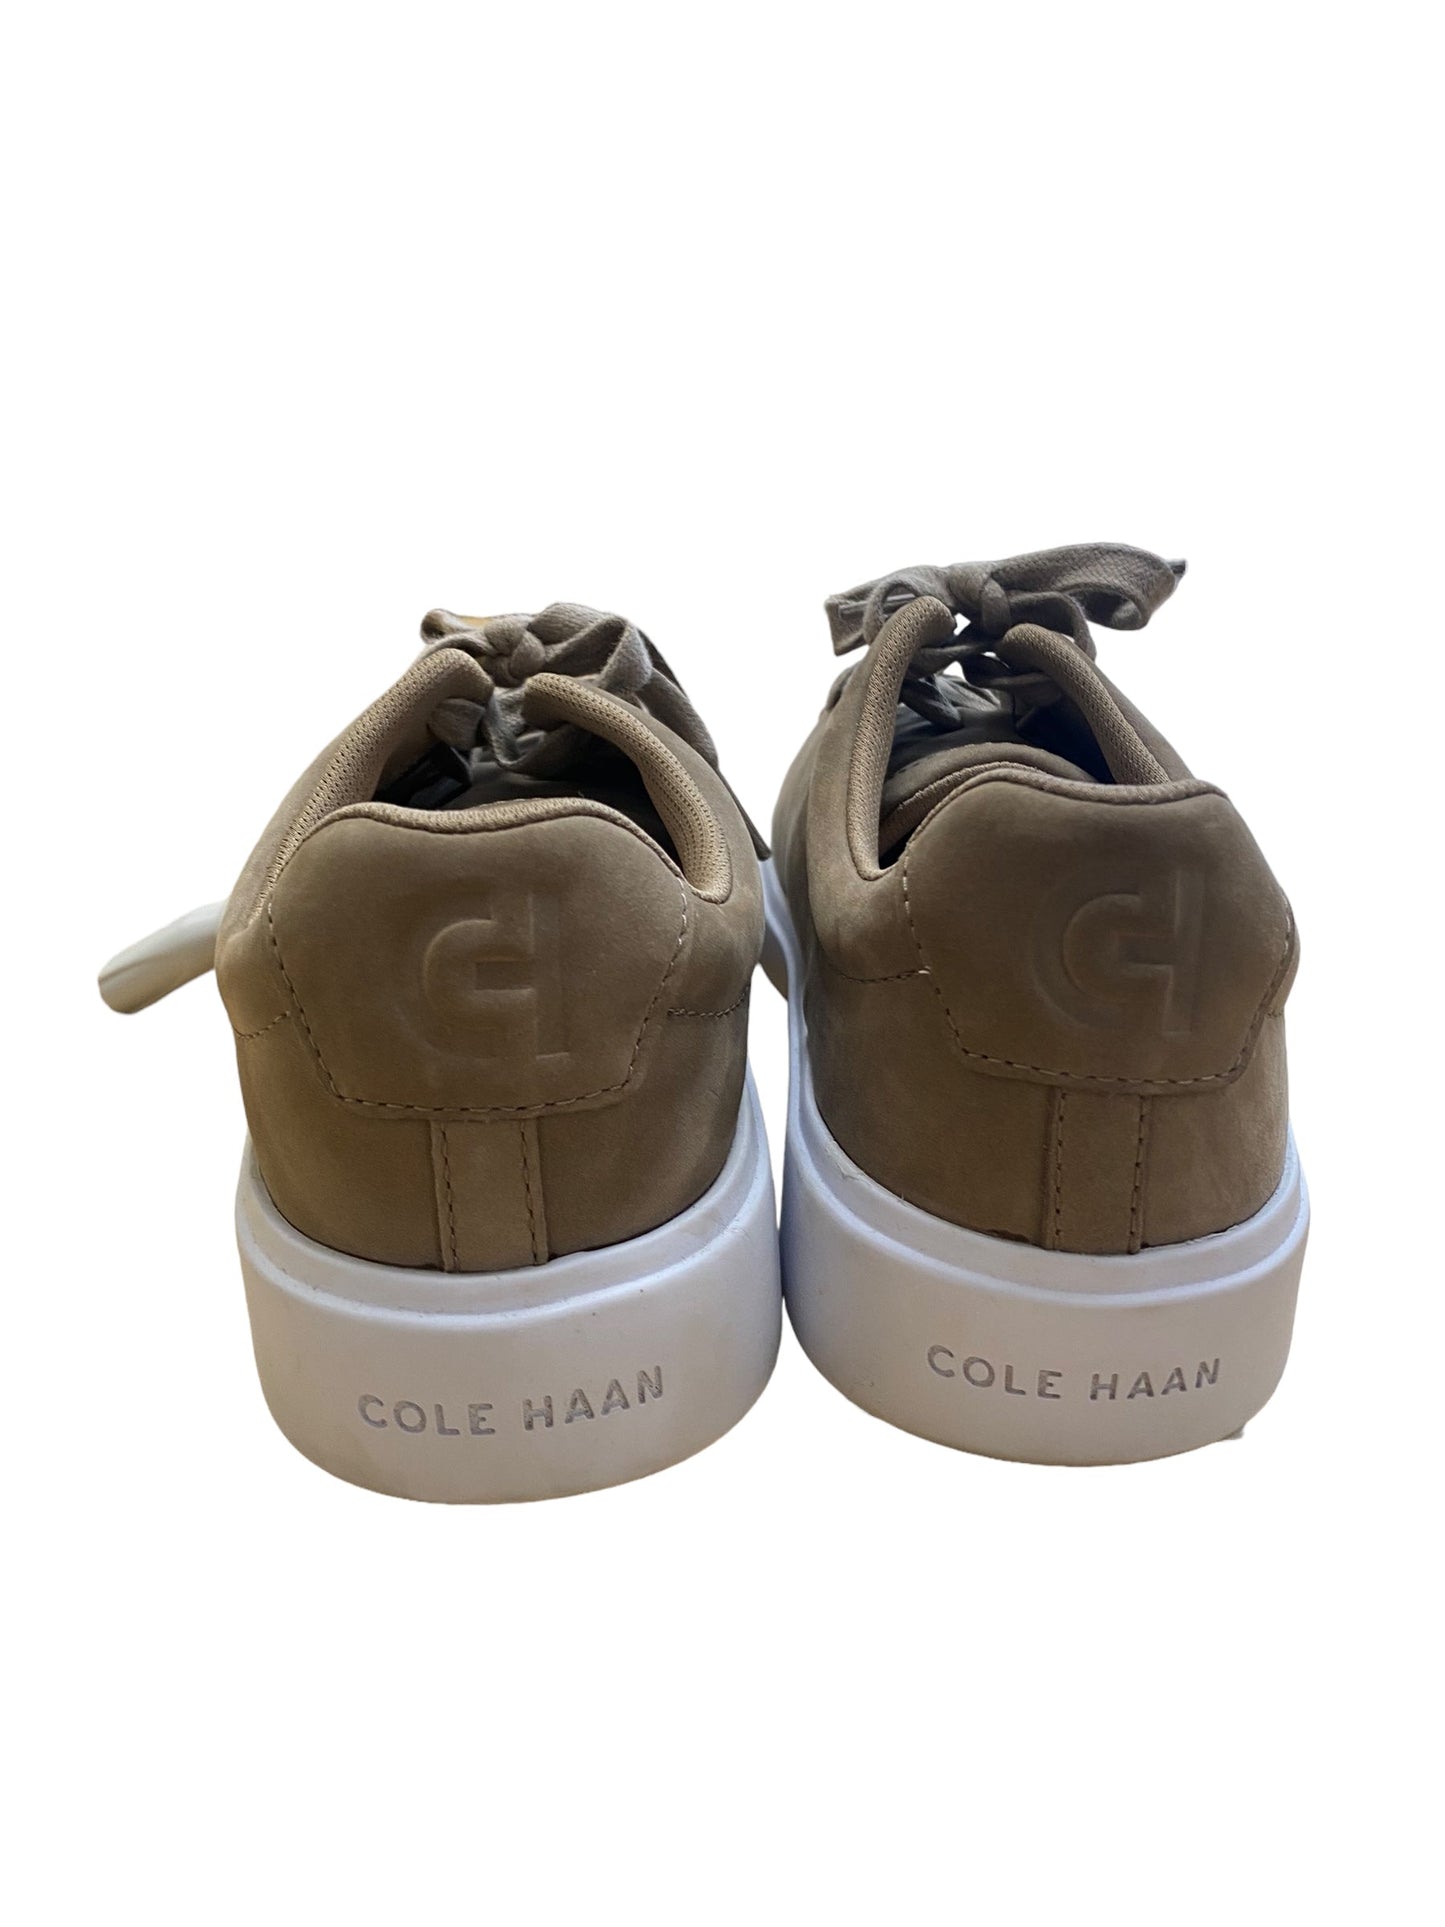 Brown Shoes Sneakers Cole-haan, Size 8